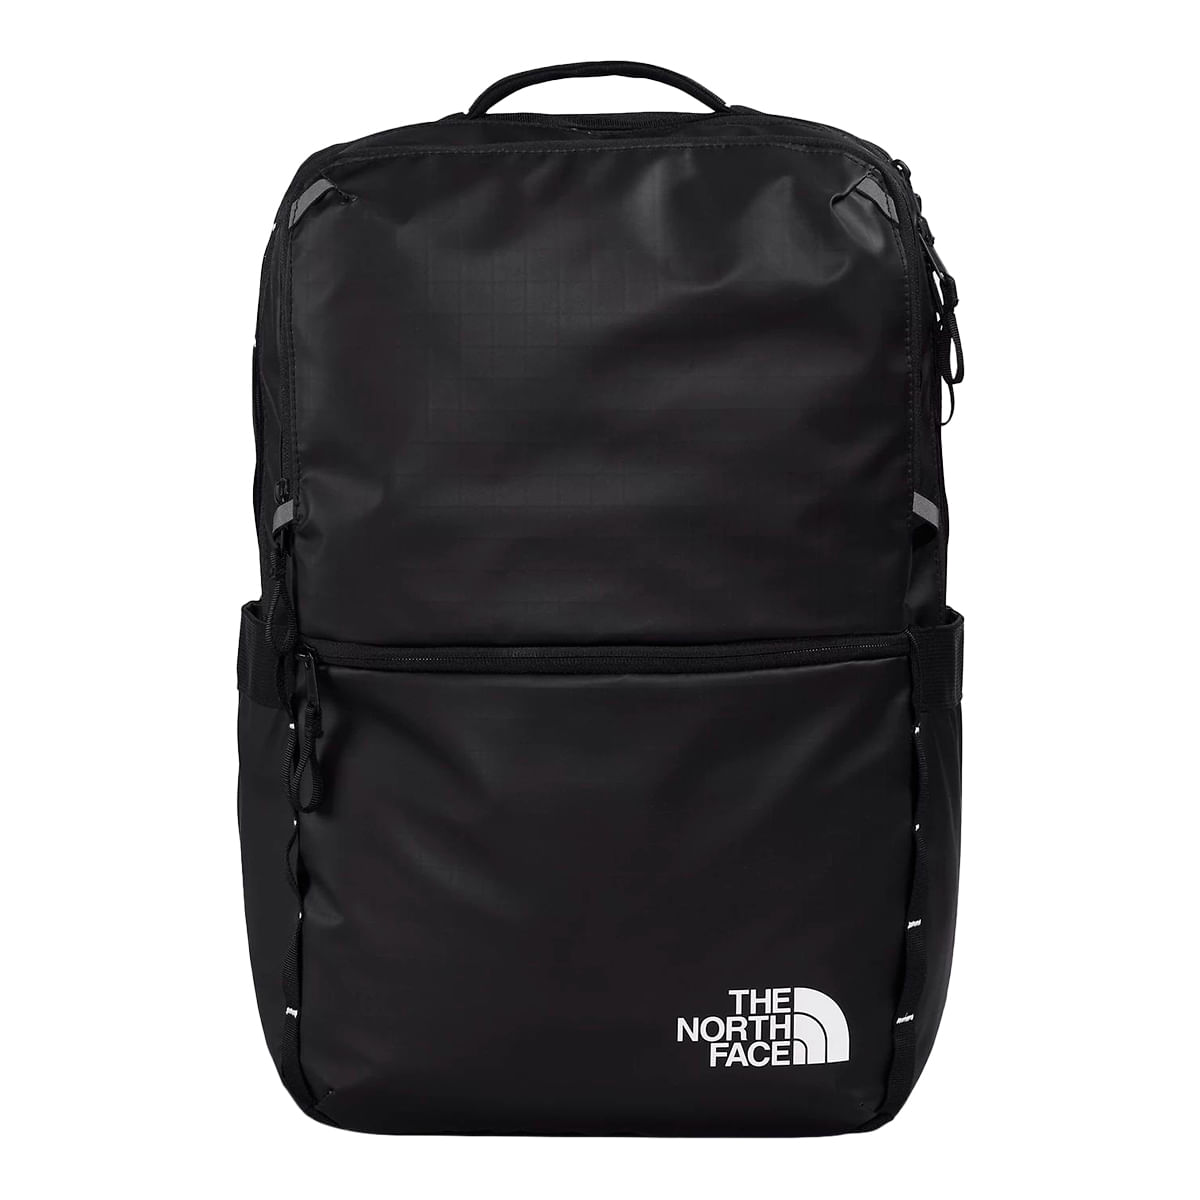 The North Face BASE CAMP VOYAGER DAYPAC TNF BLACK-TNF WH - Paragon